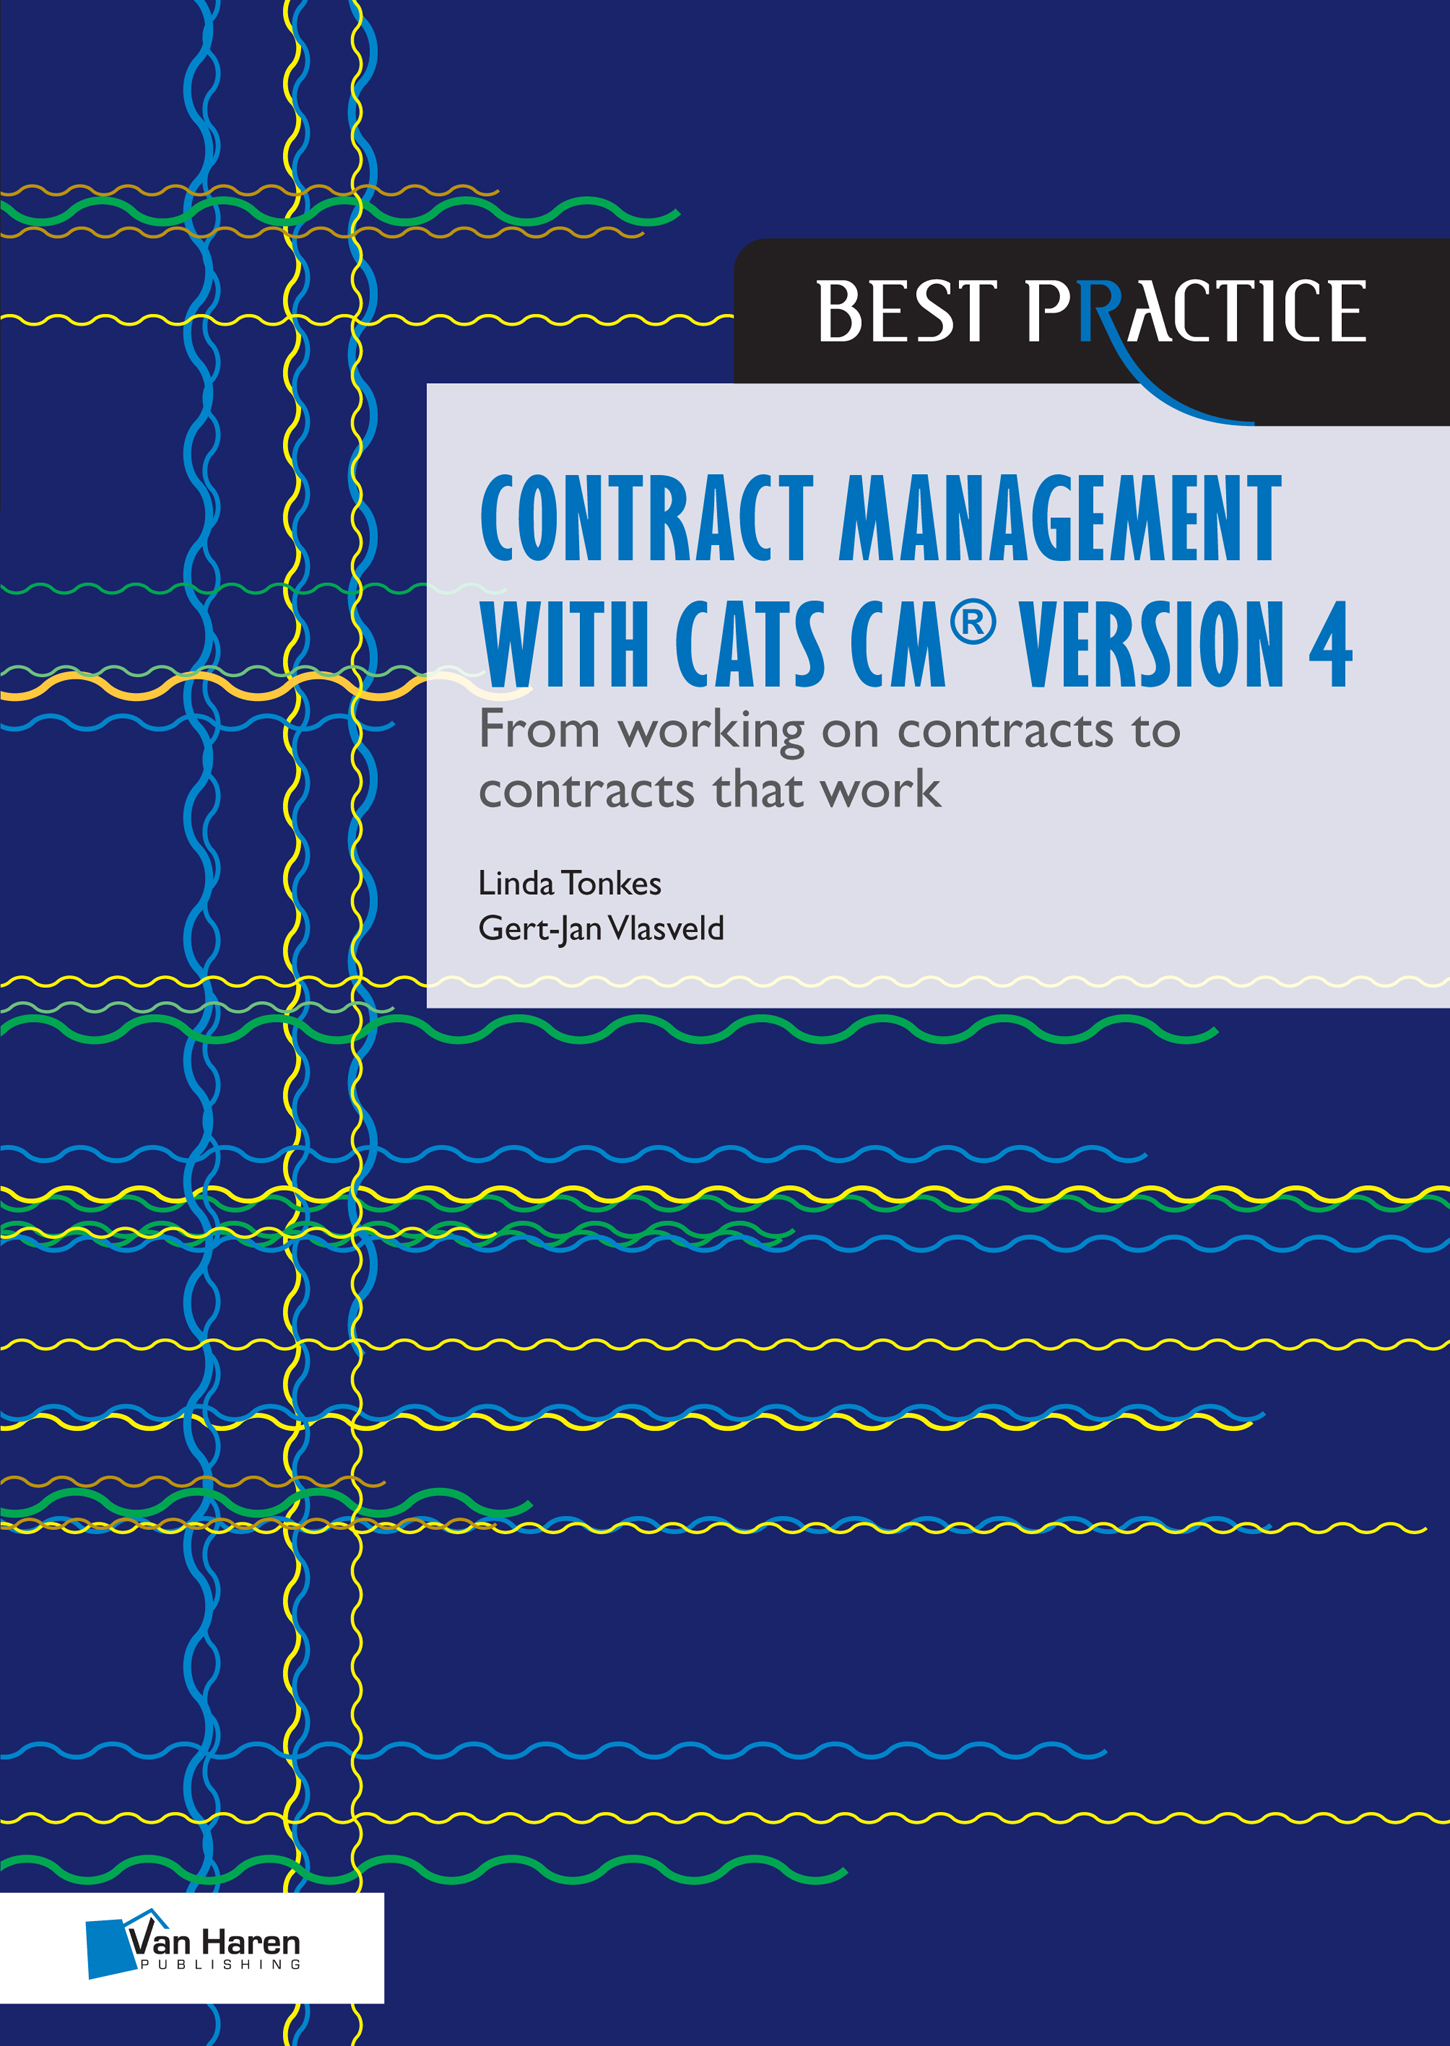 Contract management with CATS CM® version 4: From working on contracts to contracts that work